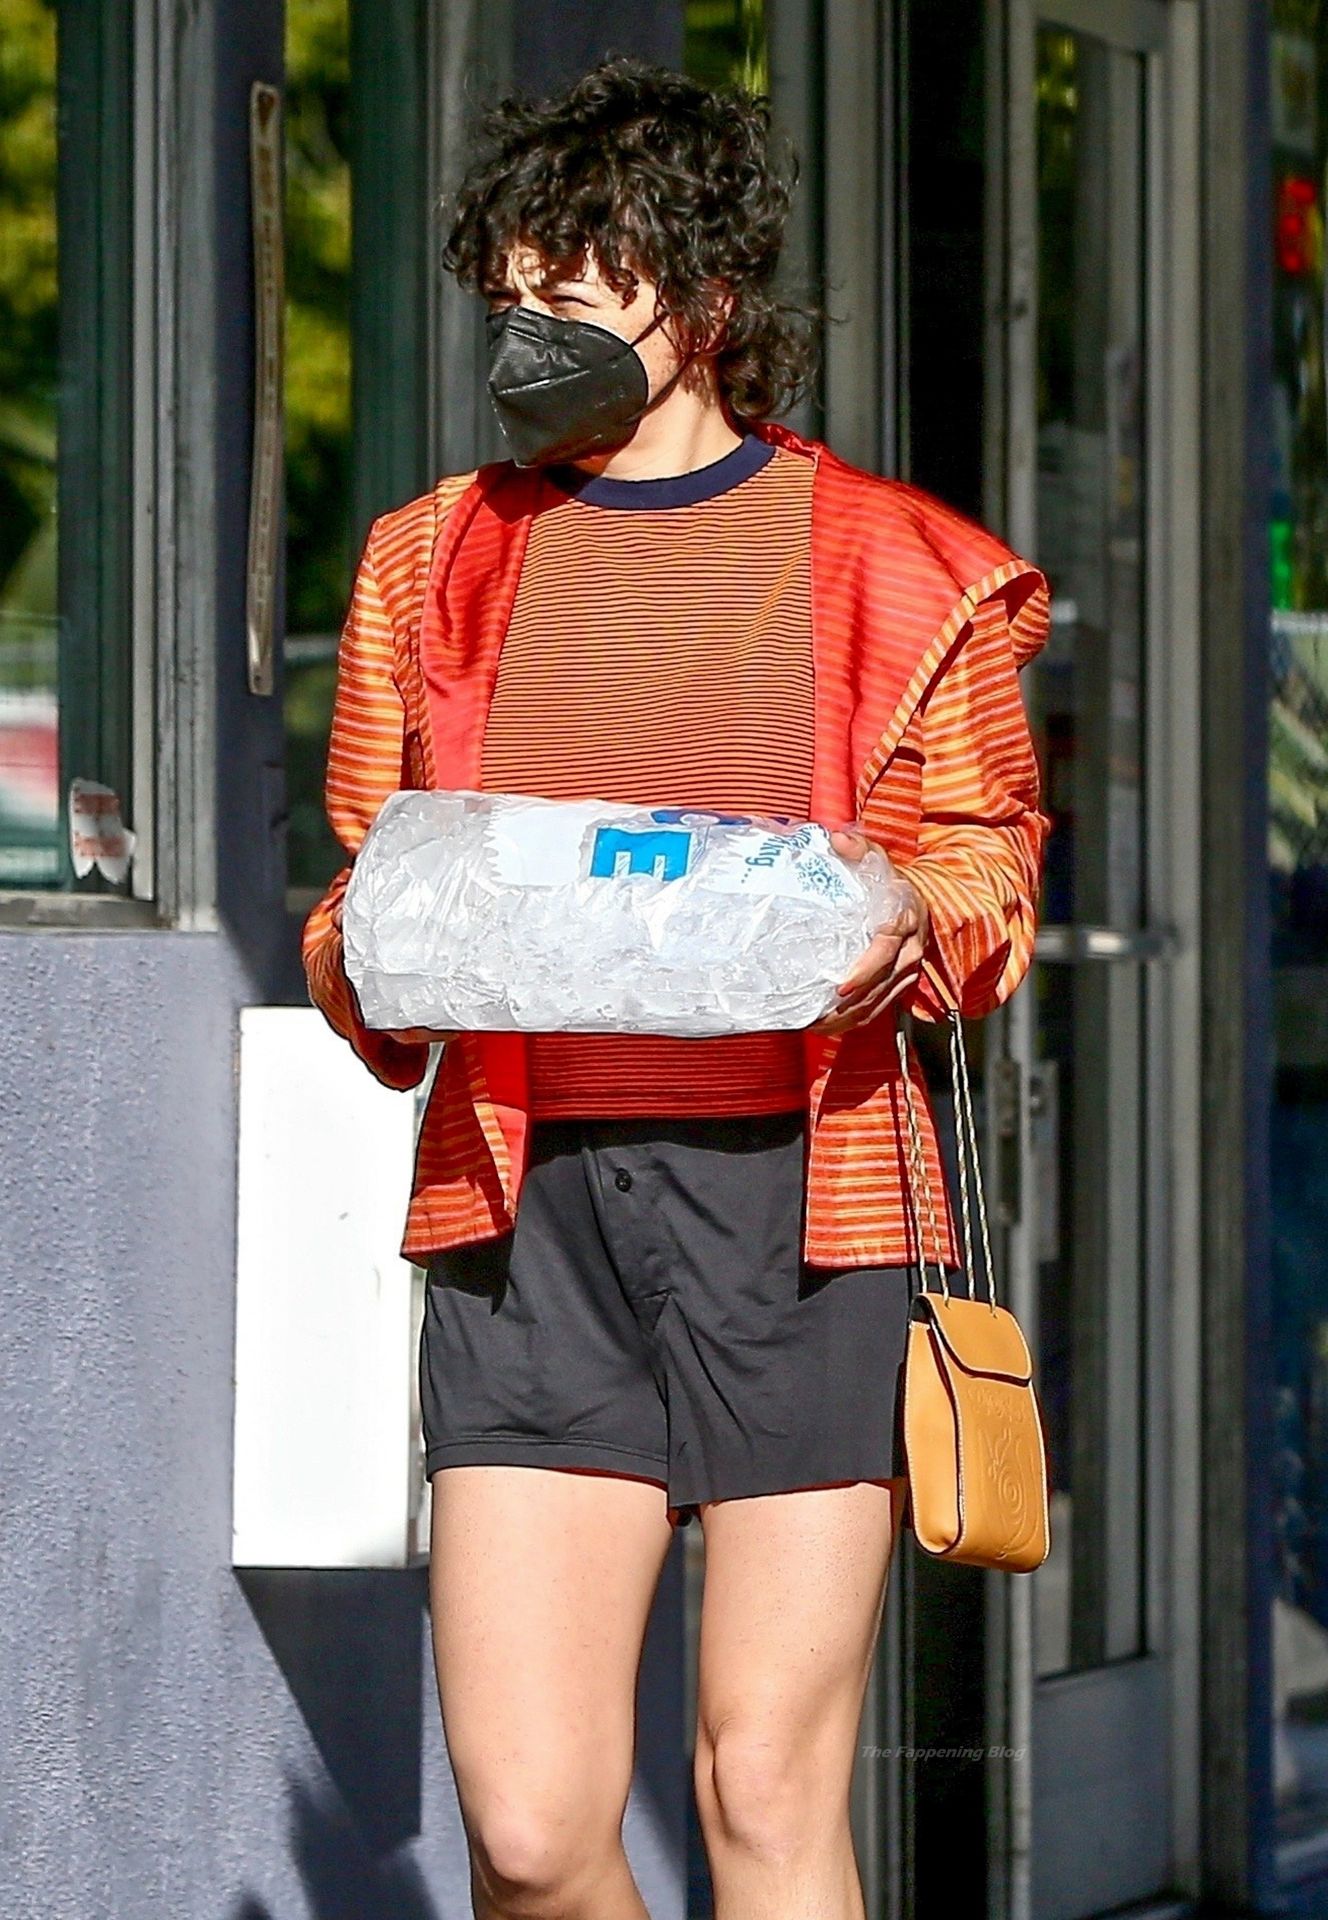 Alia Shawkat Shows Her Sexy Legs Buying a Bag of Ice at a Gas Station in LA (15 Photos)